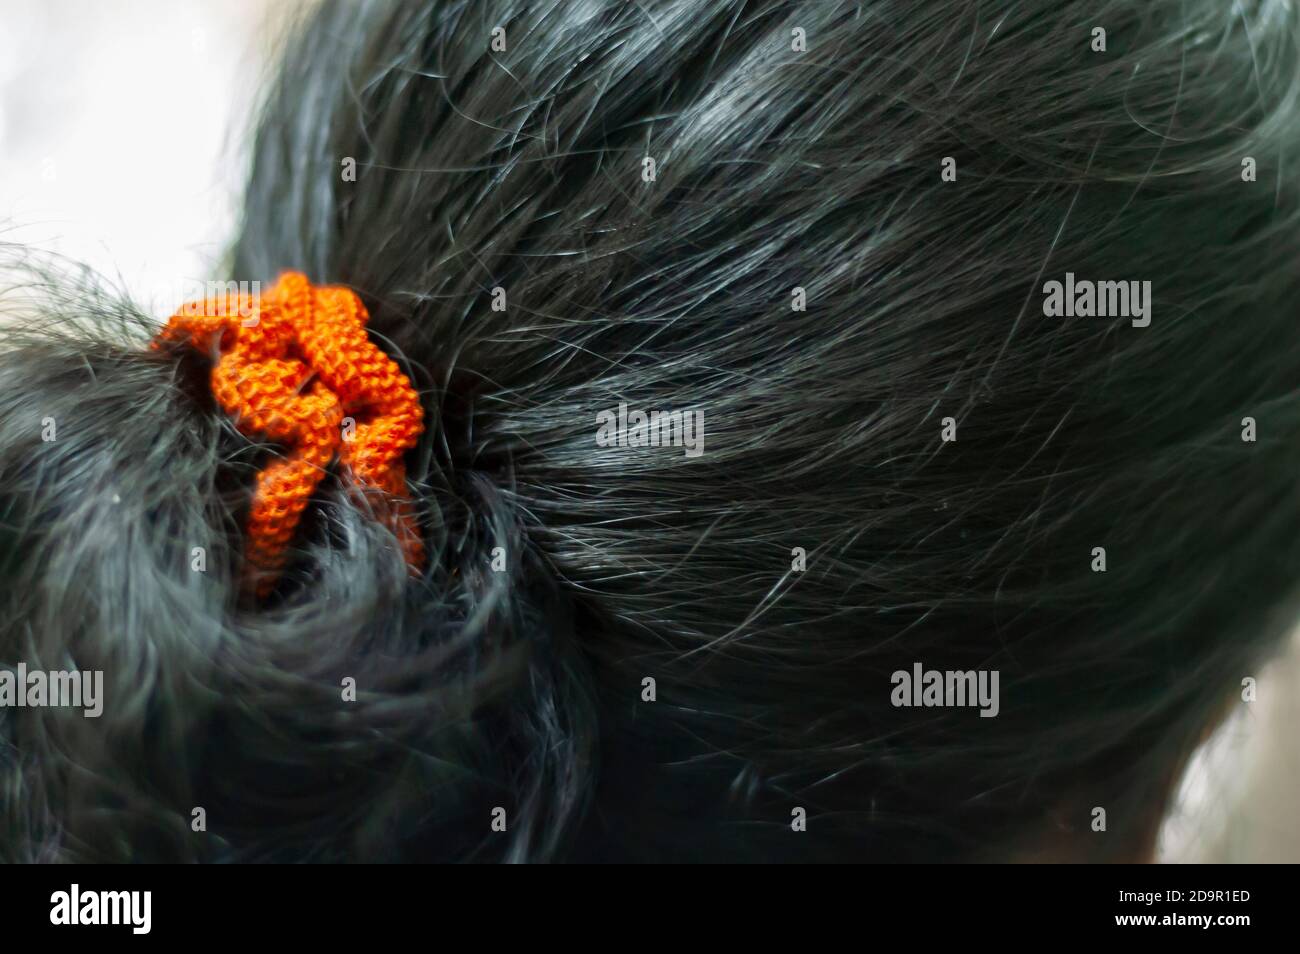 The dark black hair of a young woman of Asian Indian ethnicity. The image shows a close up of a hair band holding the pony tail she is wearing. Stock Photo